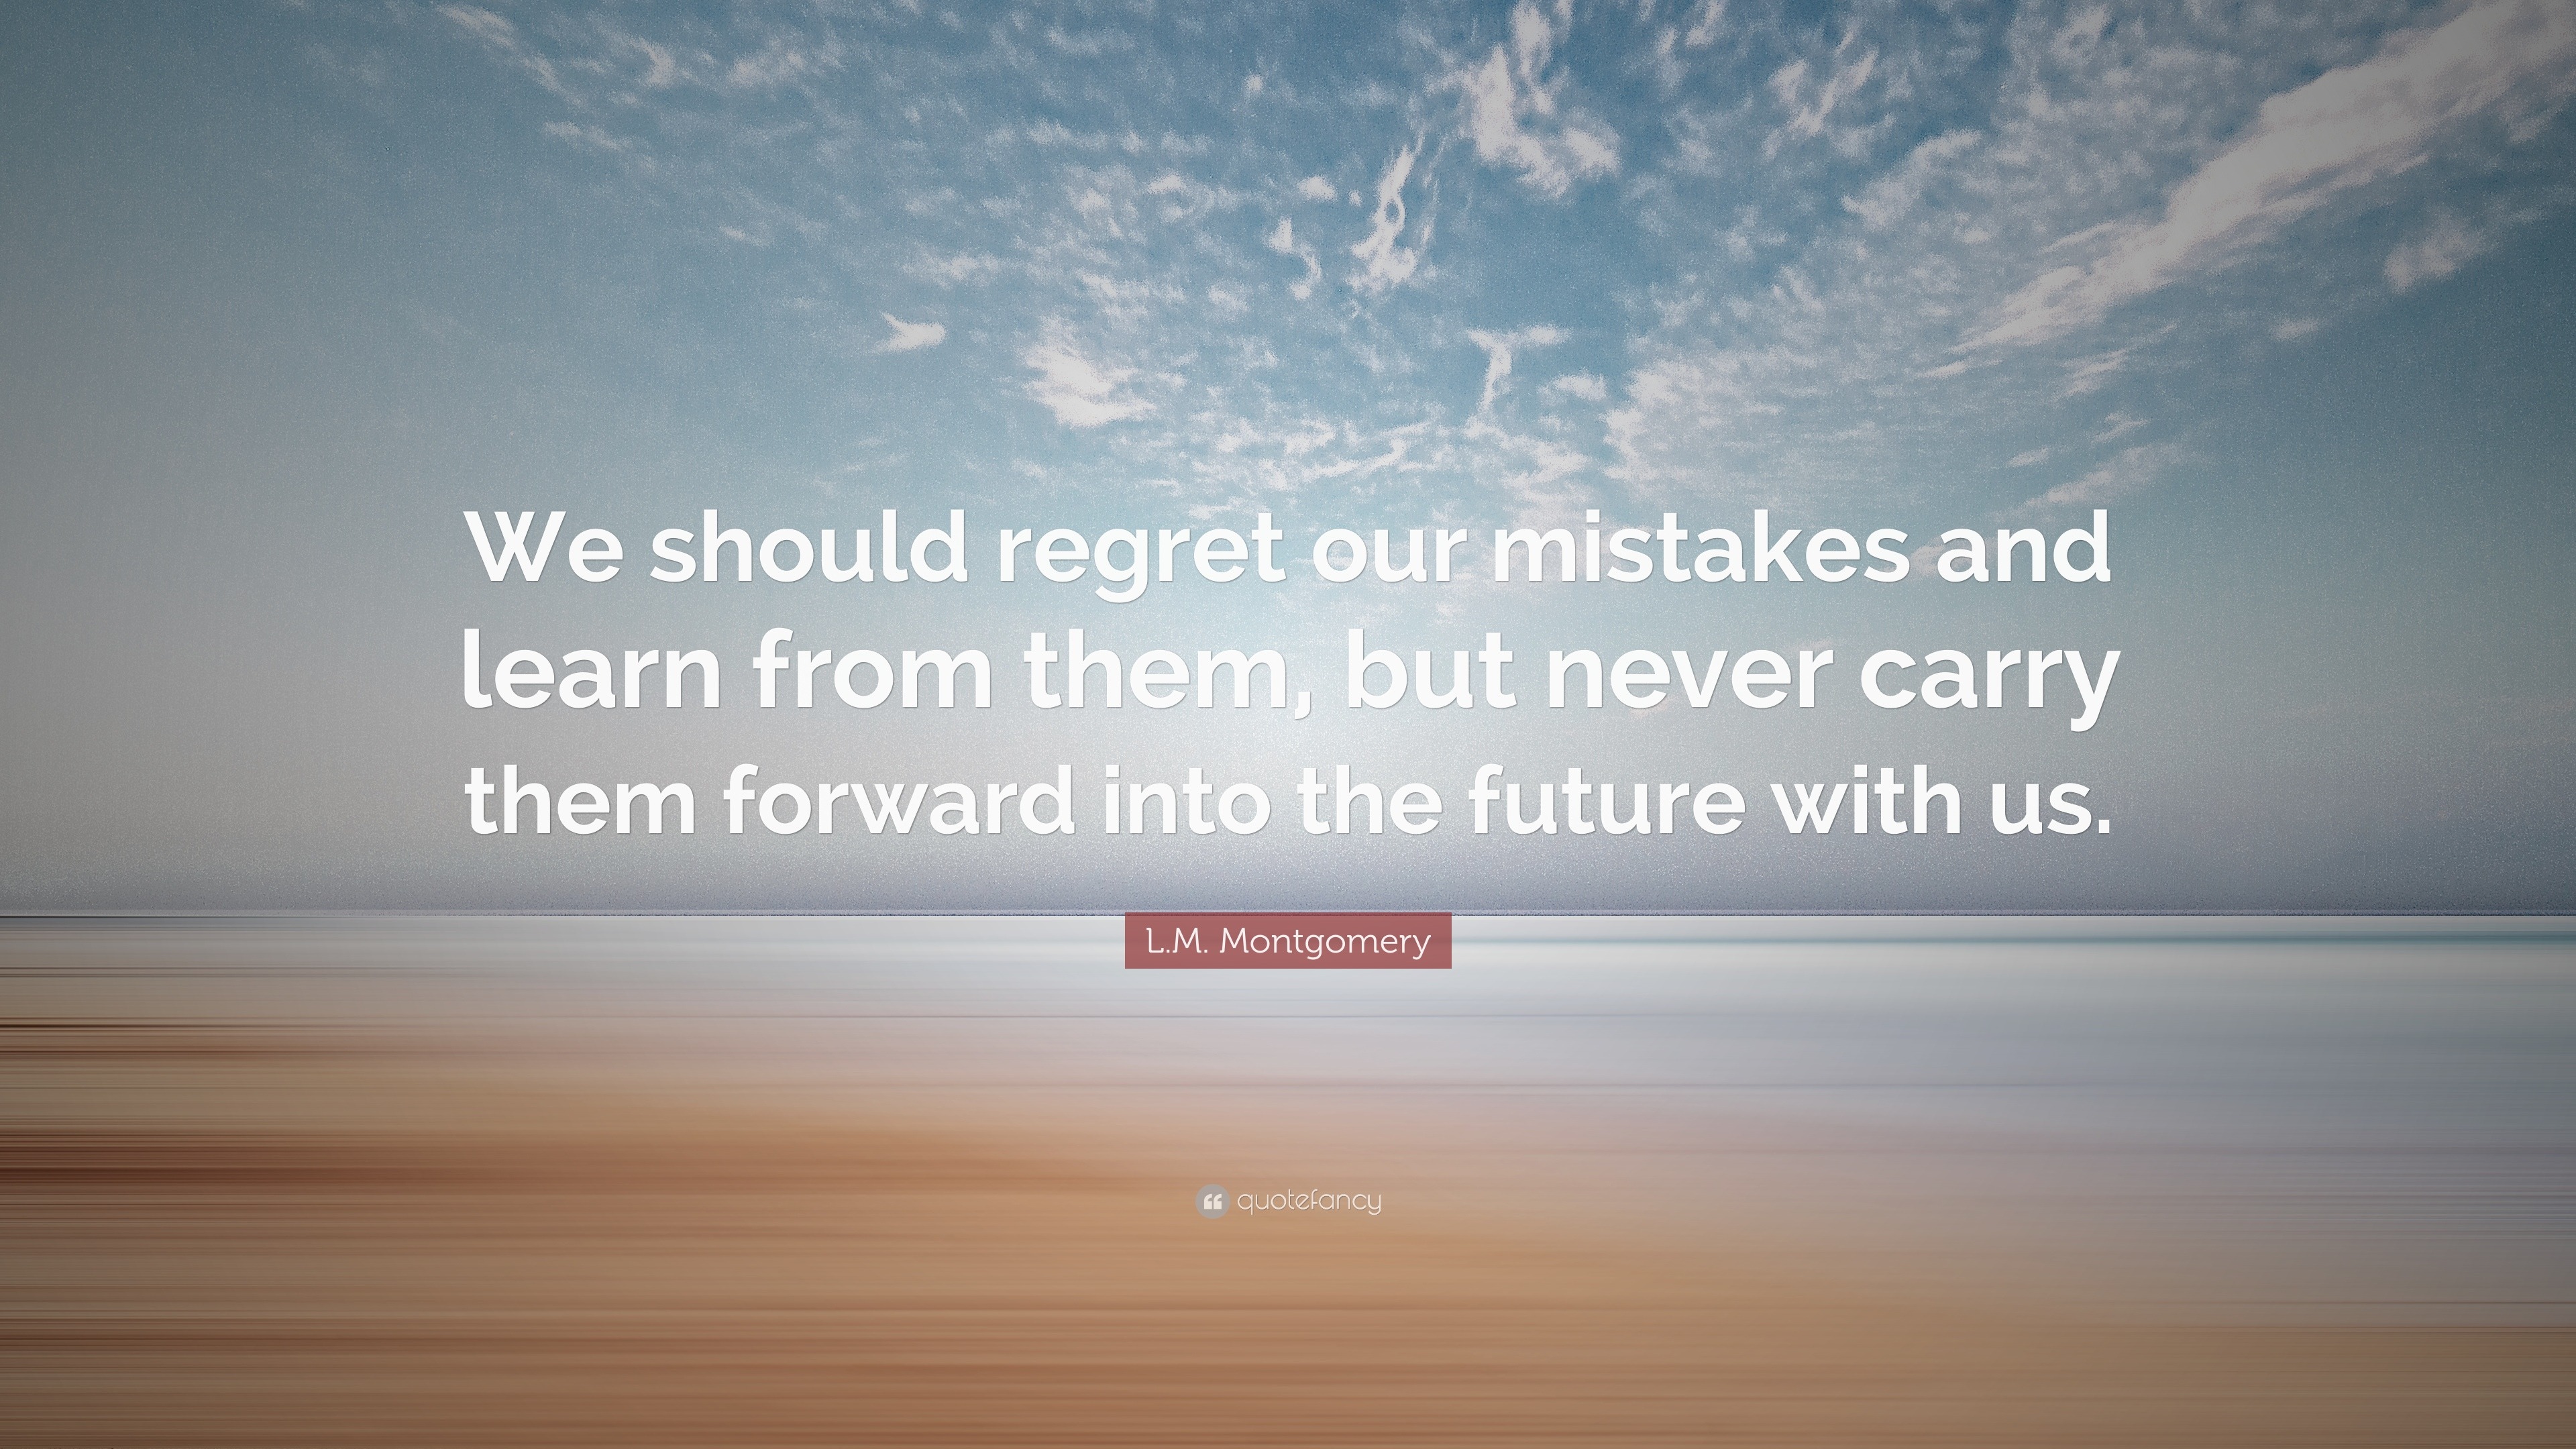 It's better to learn to from our mistakes than live with regrets